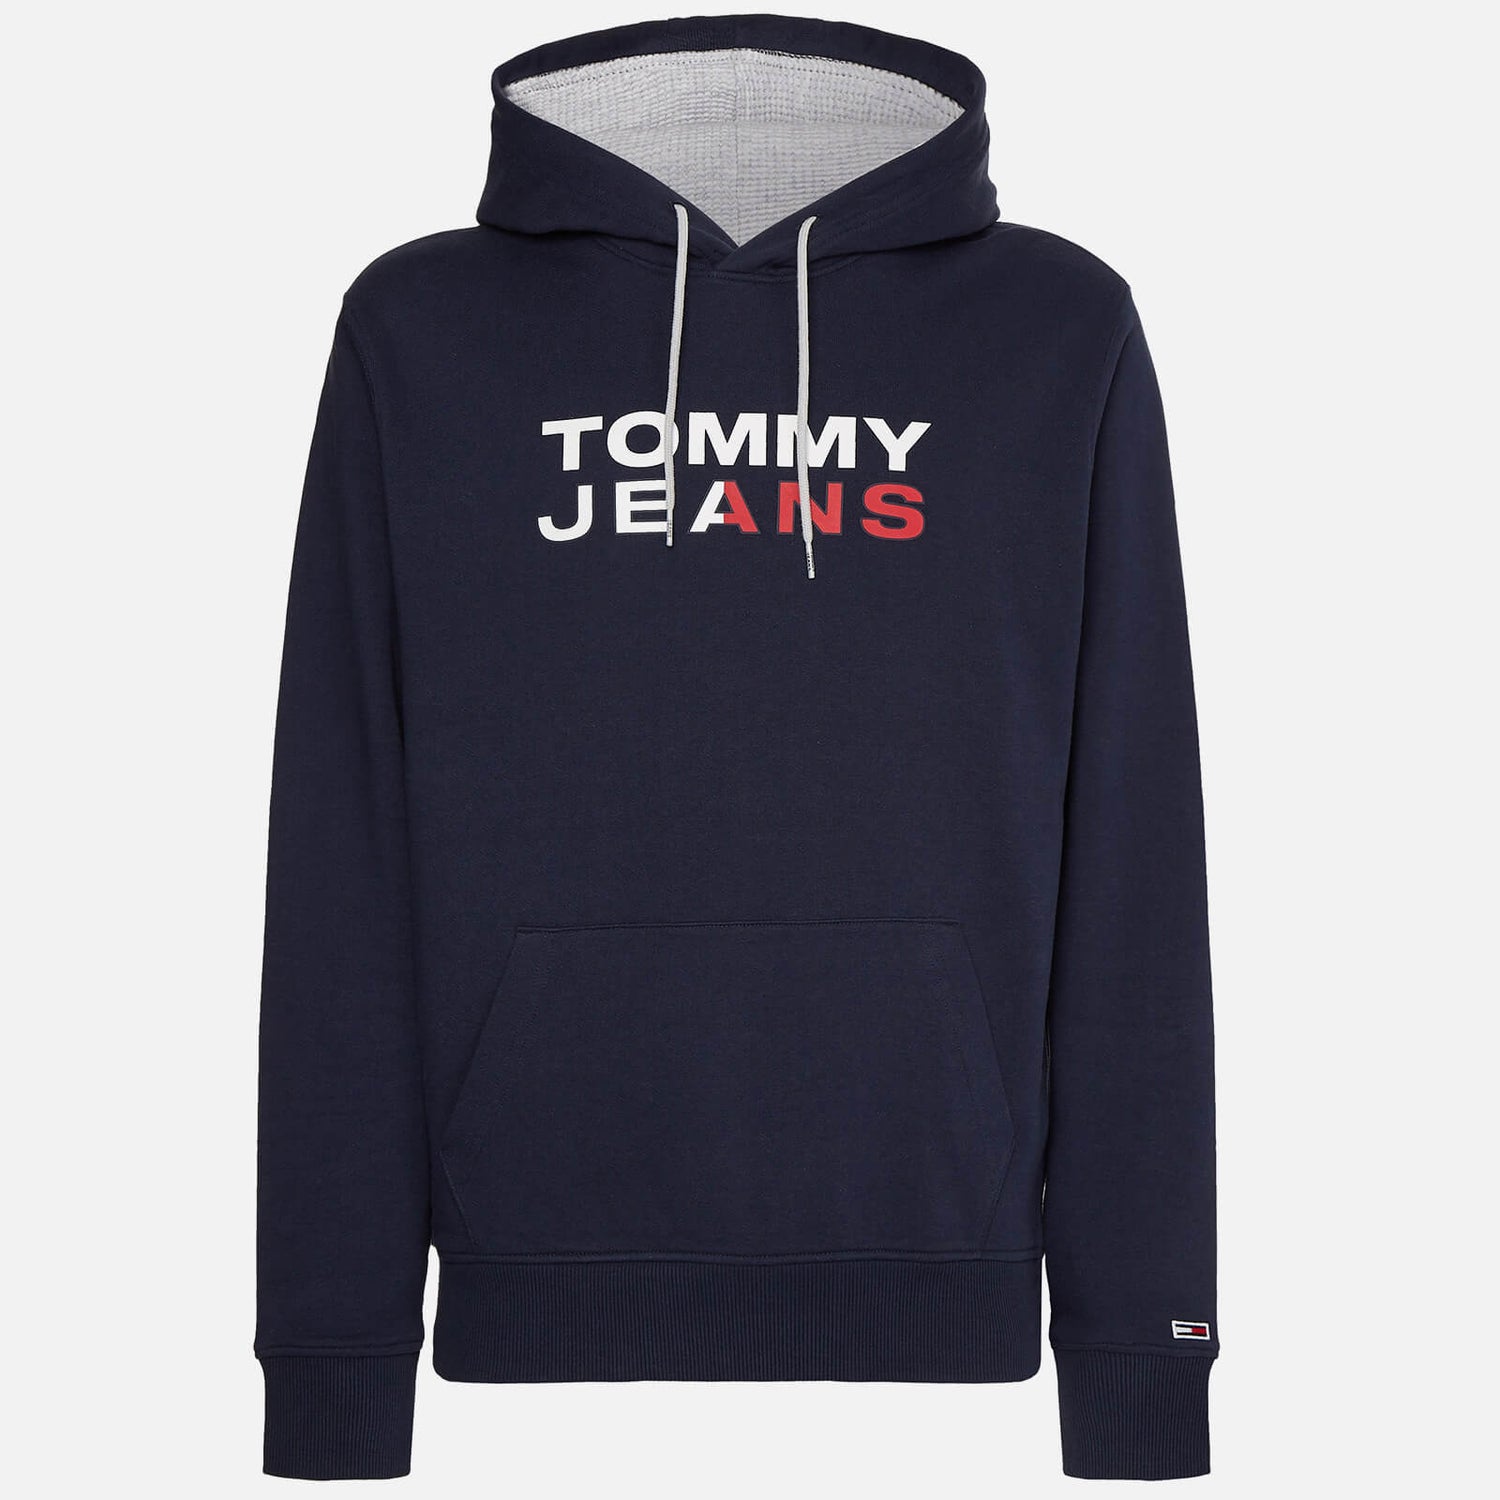 Tommy Jeans Men's Entry Hoodie - Twilight Navy